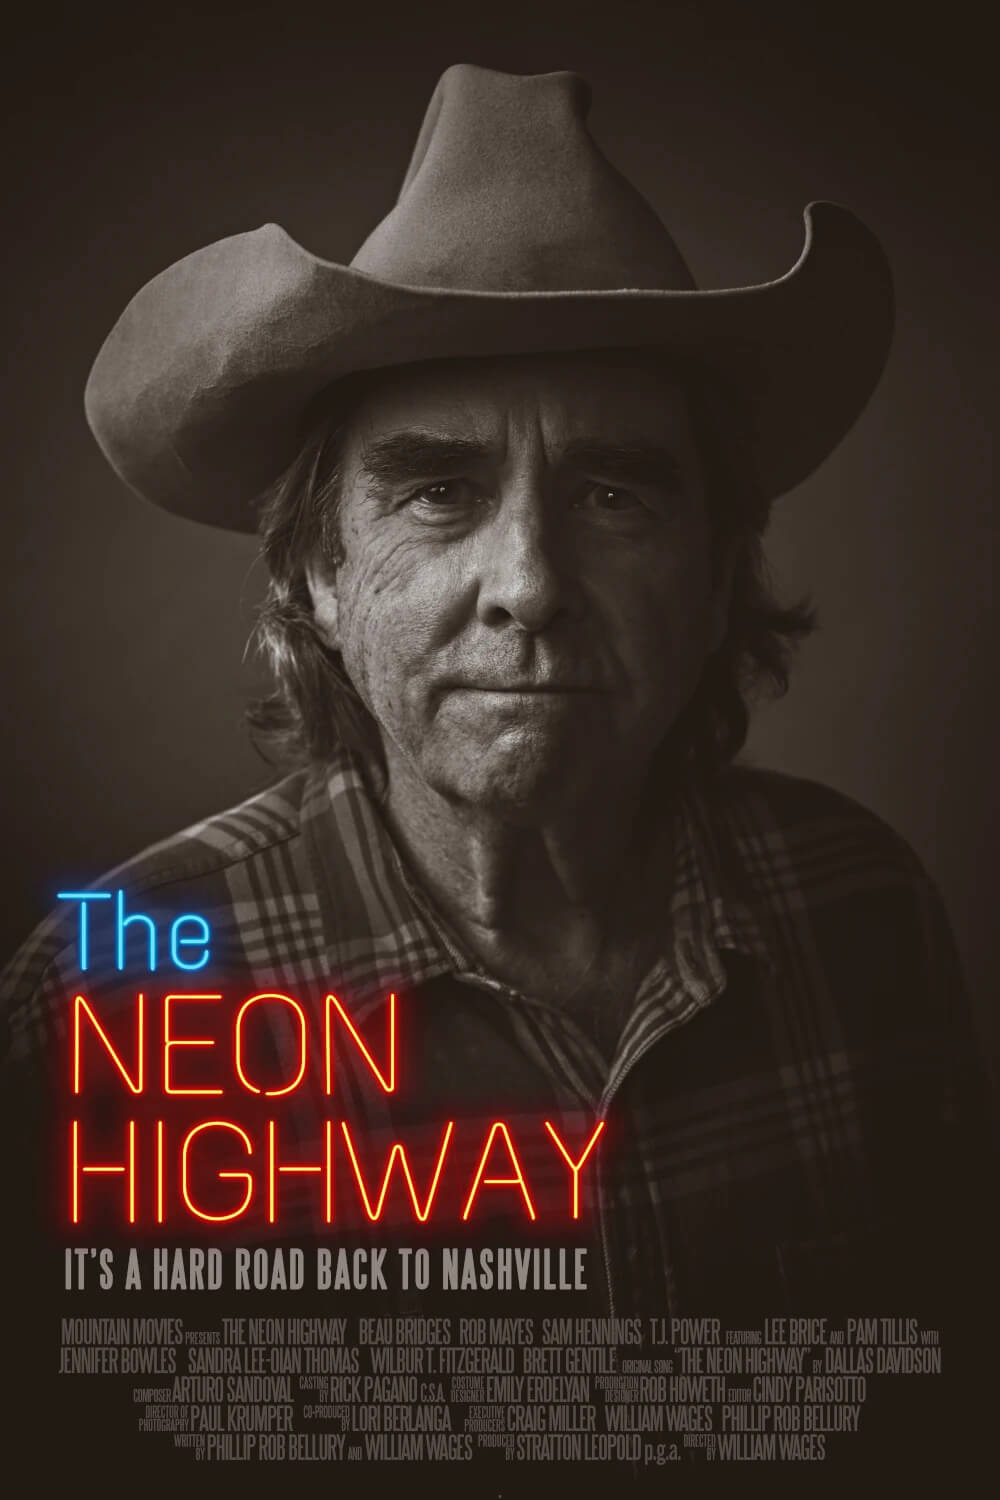 The Neon Highway Movie (2024) Cast & Crew, Release Date, Story, Budget